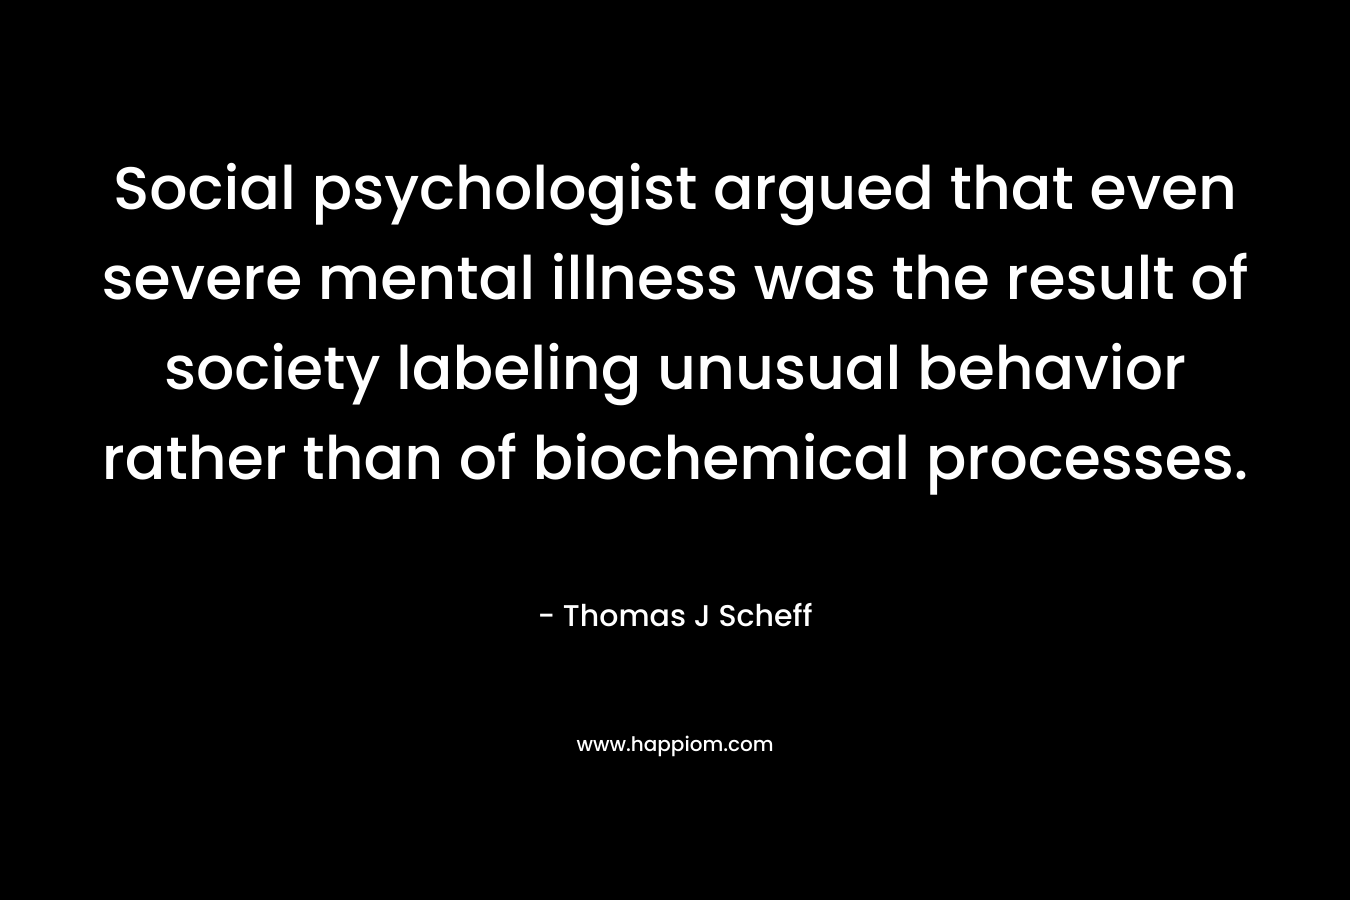 Social psychologist argued that even severe mental illness was the result of society labeling unusual behavior rather than of biochemical processes.